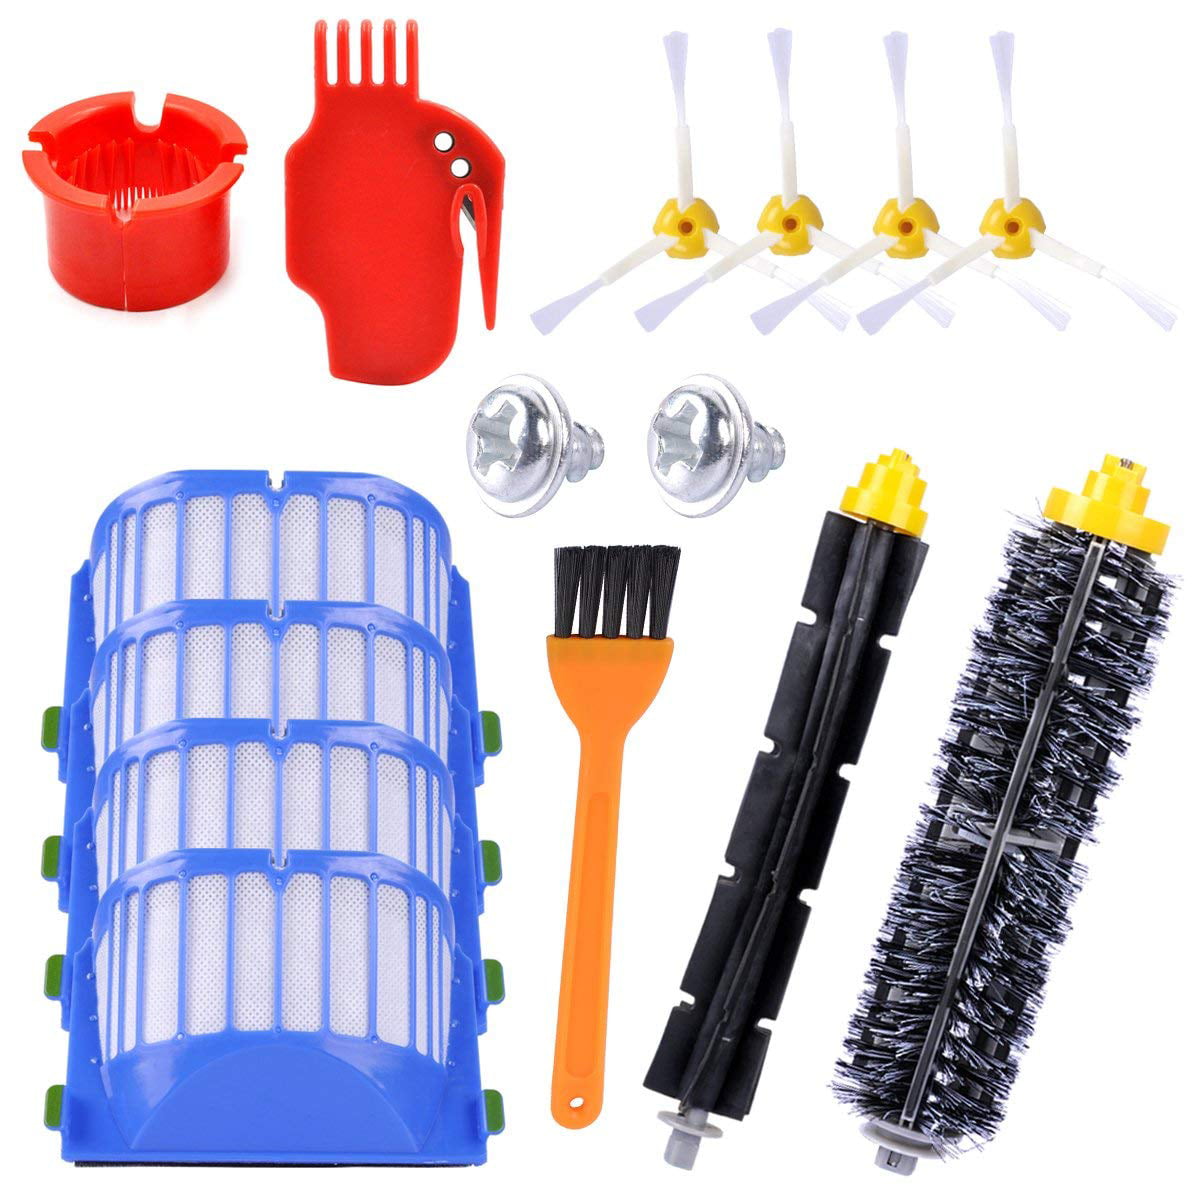 Vacuum Cleaner Brush Parts Kit Fit For iRobot Roomba 600 620 630 650 660 675 690